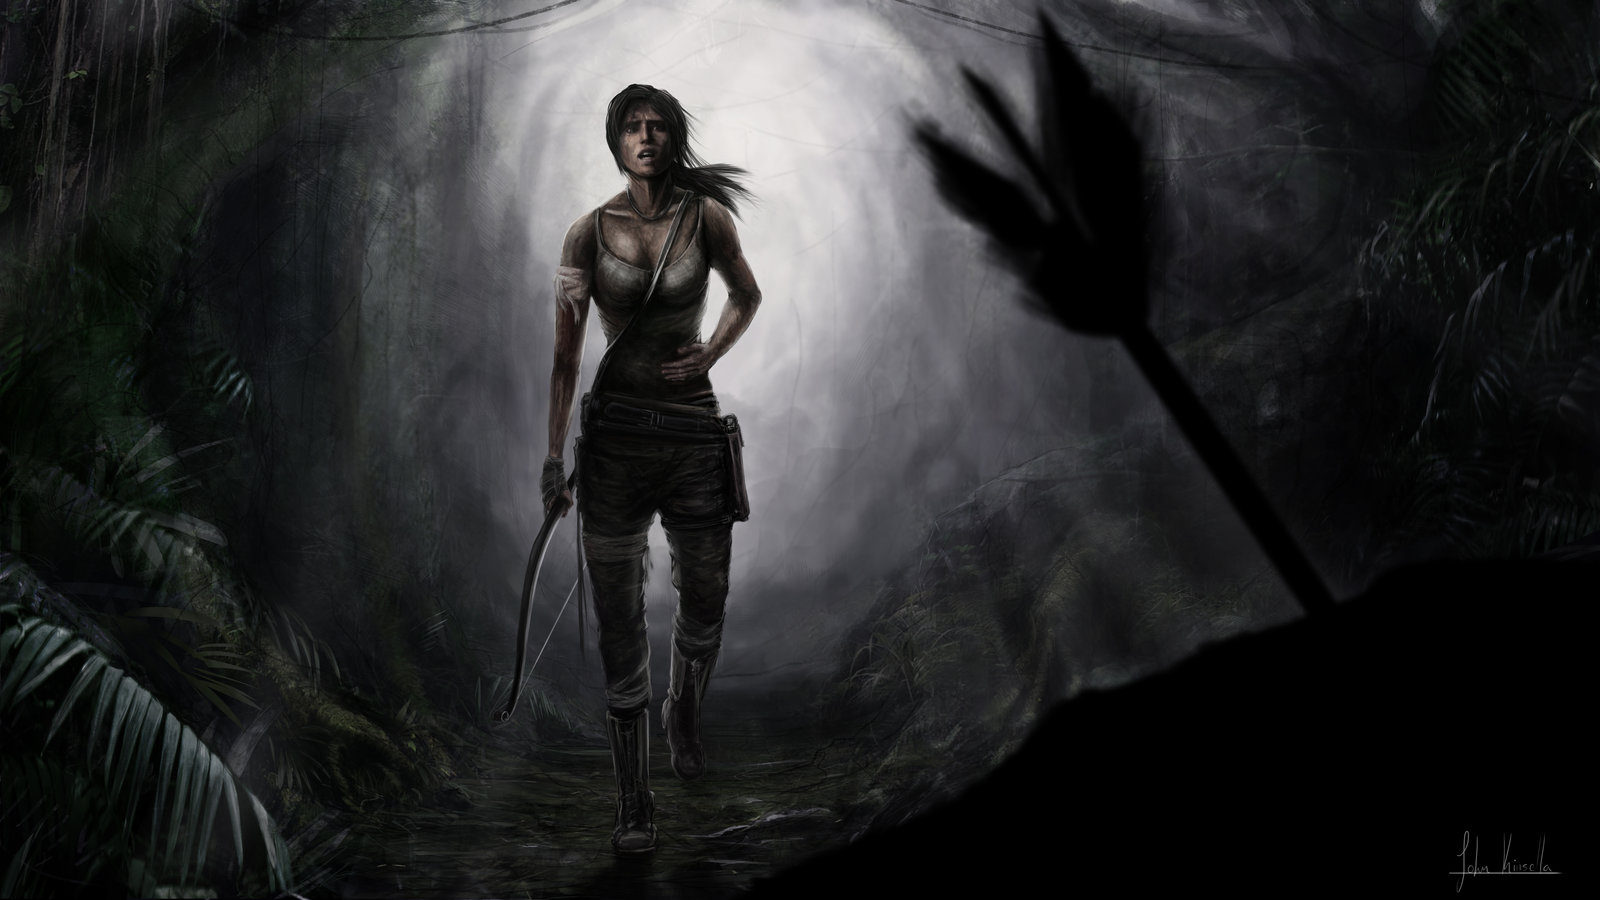 See Beautiful Rise Of The Tomb Raider Wallpaper Photos Image